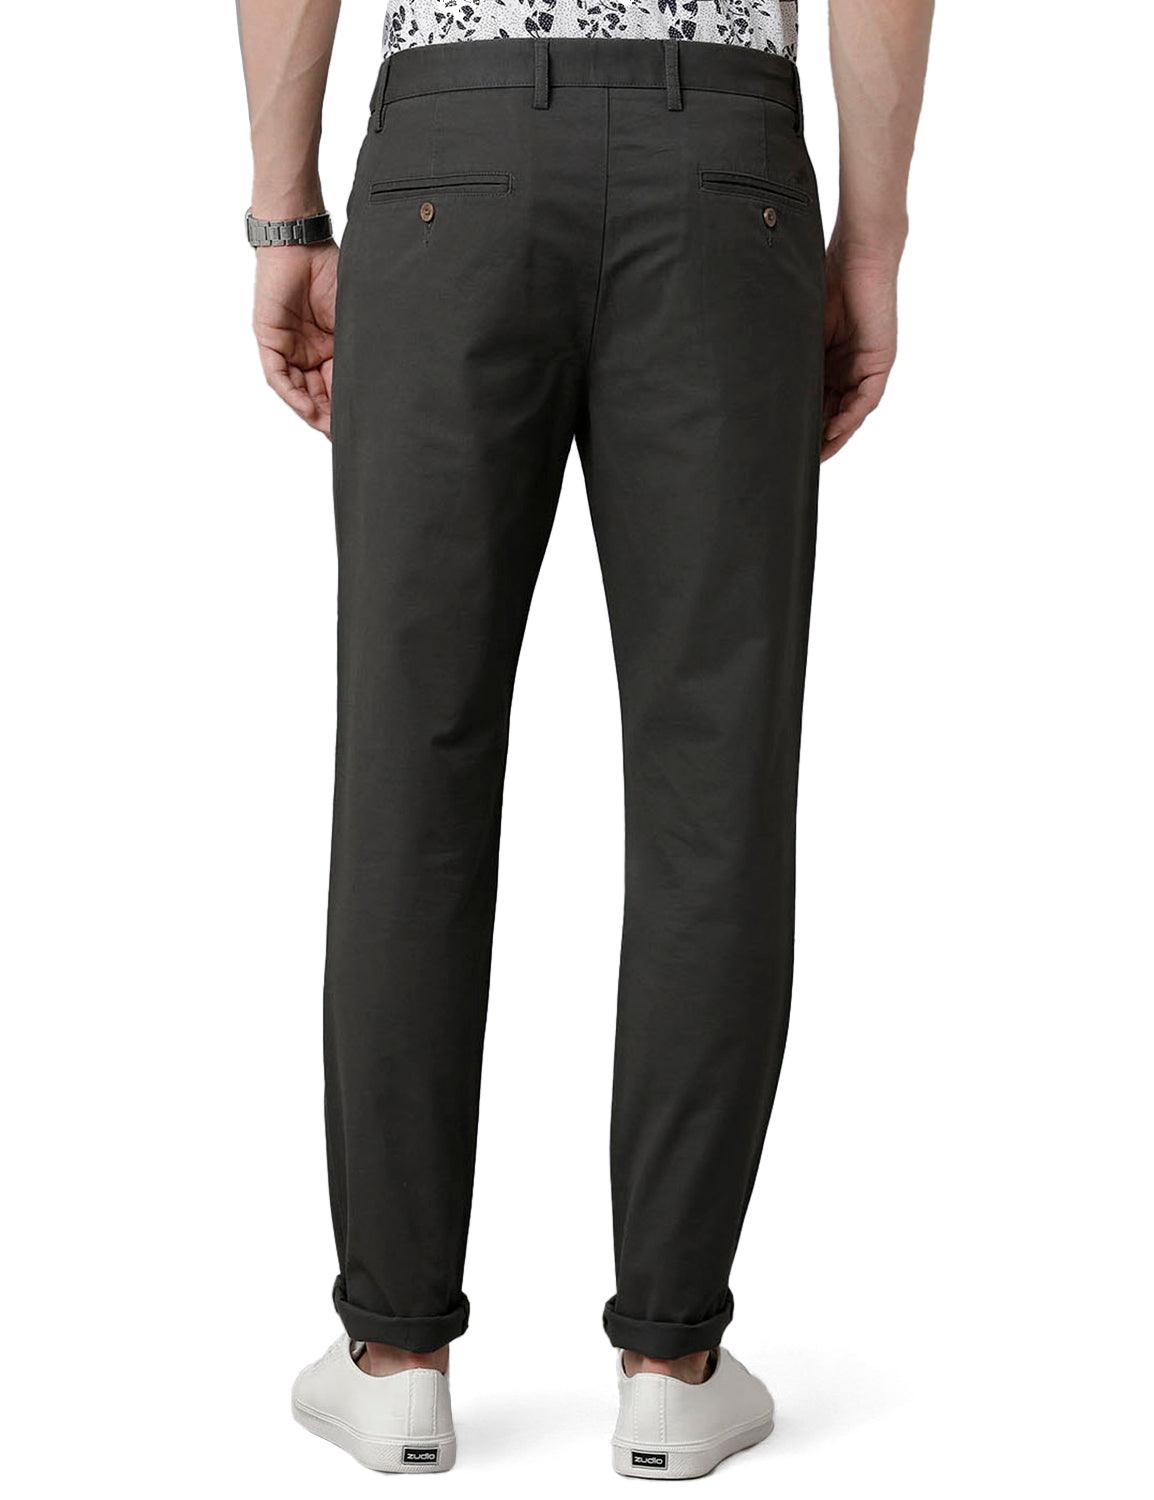 CharcoalGrey Solid Slim Fit Trouser - Double Two